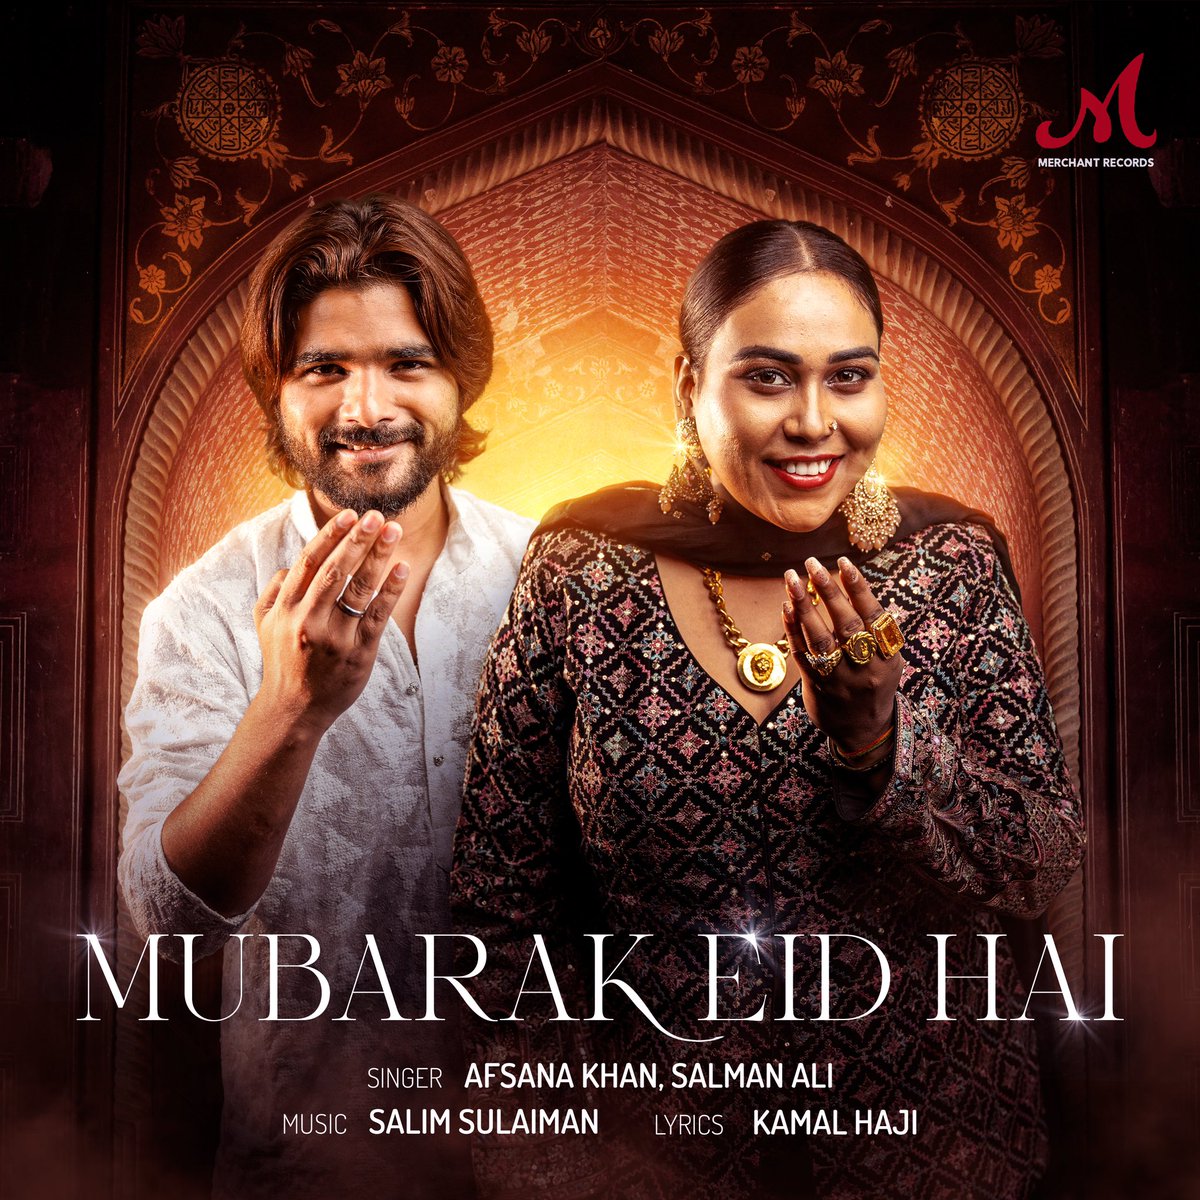 Get ready to elevate your Eid celebrations with #MubarakEidHai! 🎶 Embrace the joy of Eid through heartfelt melodies by @afsanakhan & @SalmanAli, Composed by @SlimSulaiman and written by @kamalhaji Coming April 5th! #MerchantRecords #SalimSulaiman